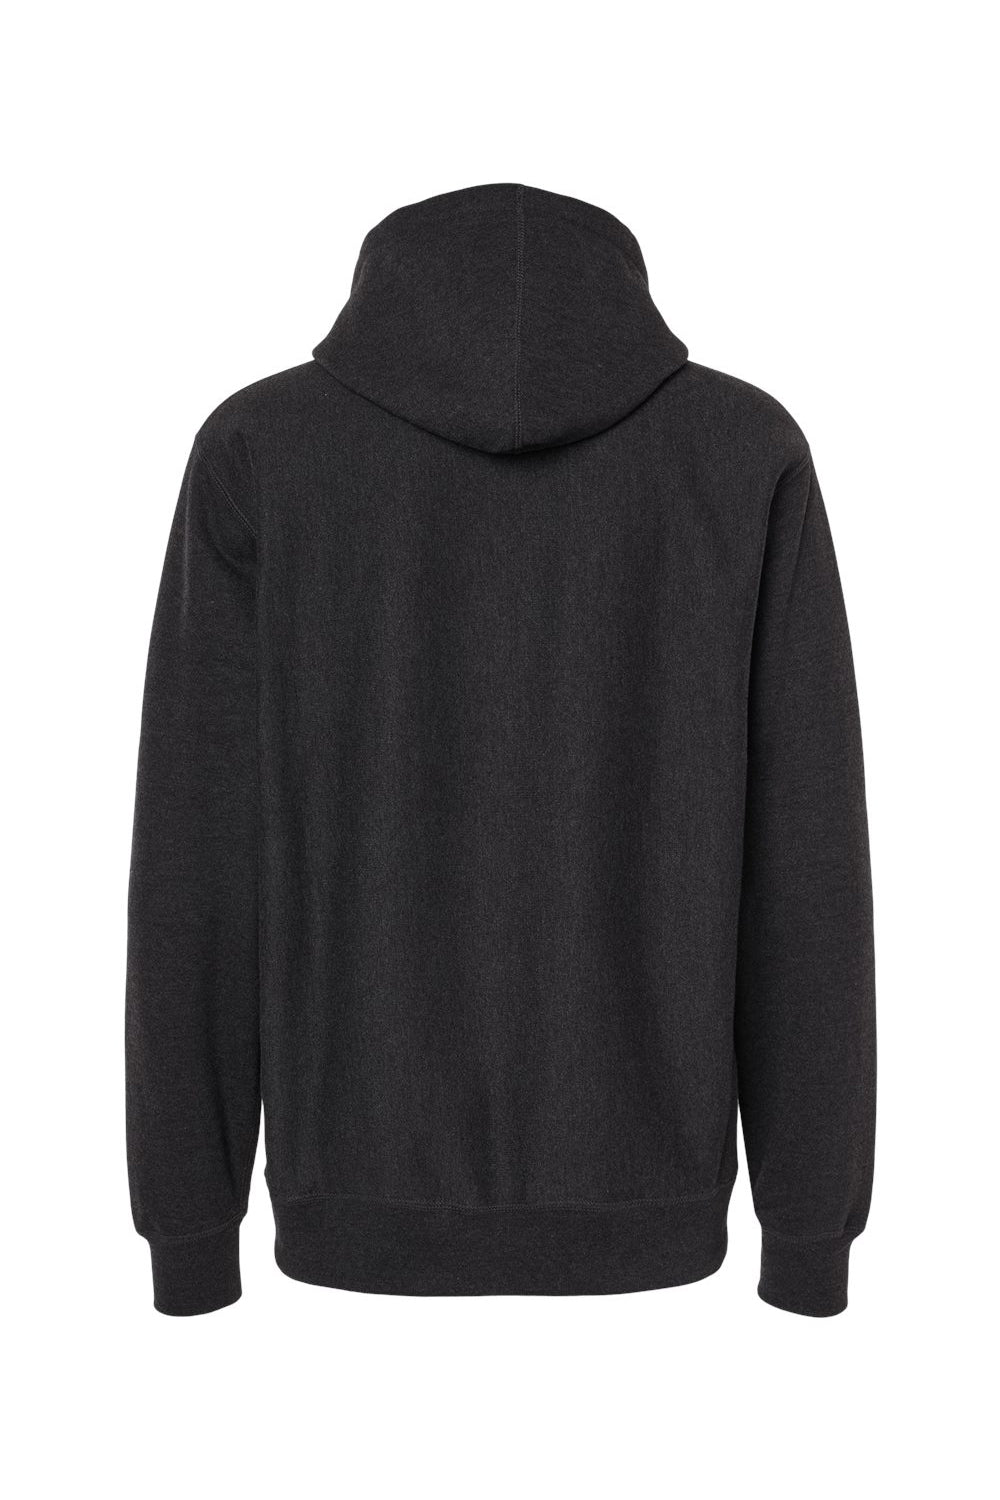 Independent Trading Co. IND5000P Mens Legend Hooded Sweatshirt Hoodie Heather Charcoal Grey Flat Back